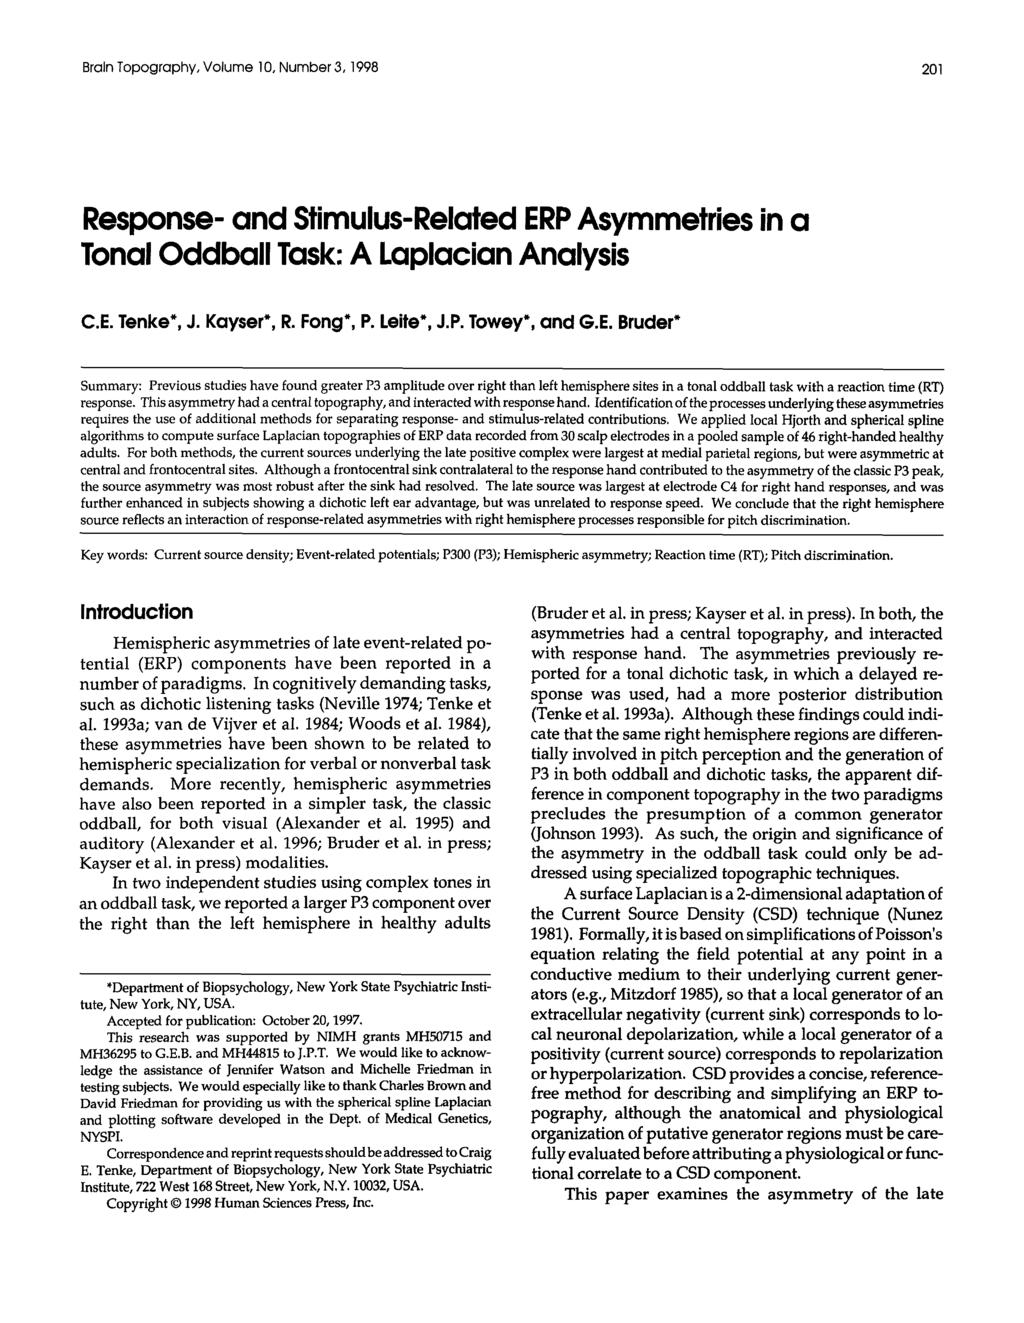 Brain Topography, Volume 10, Number 3,1998 201 Response- and Stimulus-Related ERP Asymmetries in a Tonal Oddball Task: A Laplacian Analysis C.E. Tenke*, J. Kayser*, R. Fong*, P. Leite*, J.P. Towey*, and G.